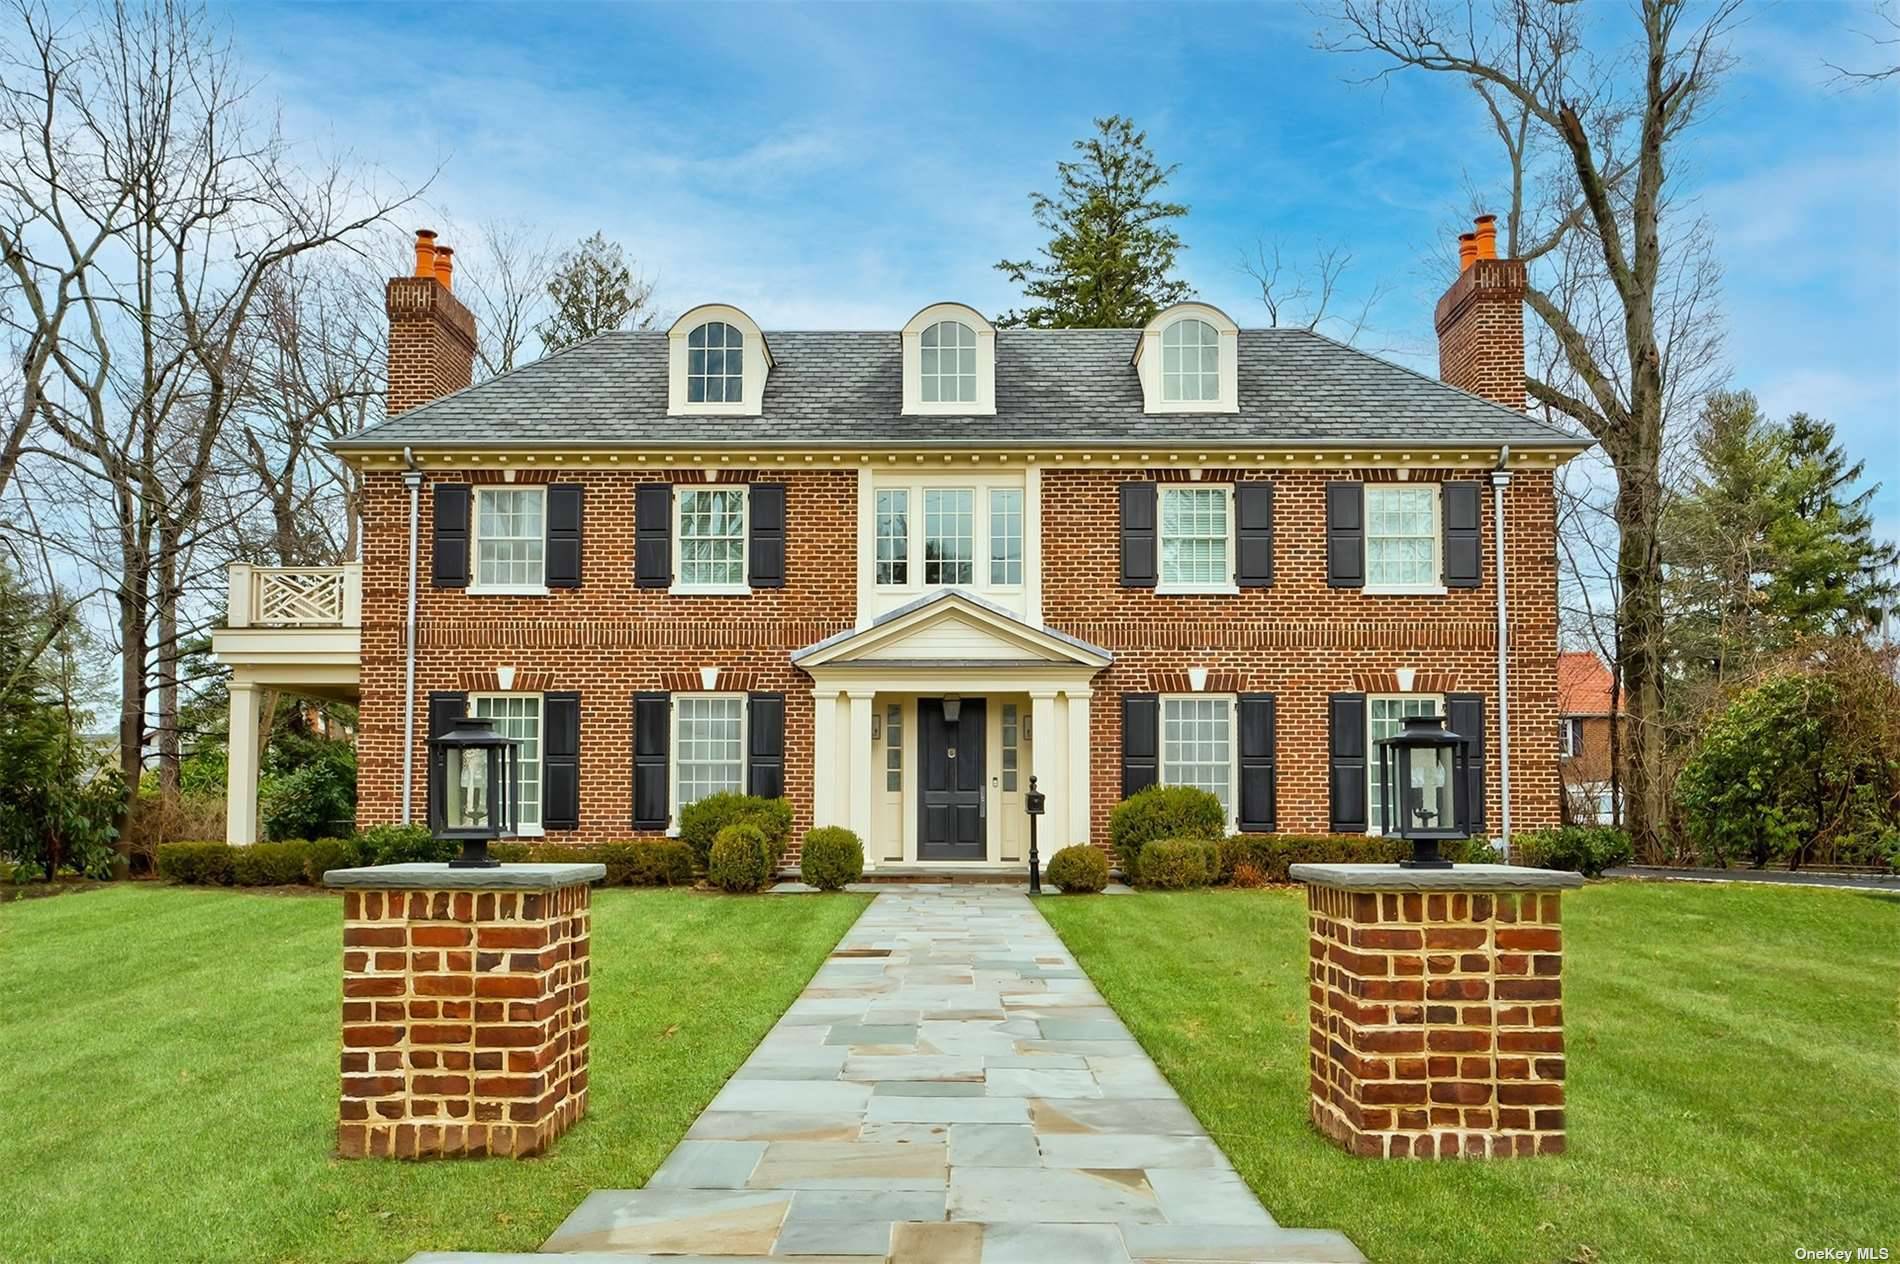 Welcome to Stunning 7 Bedrooms Brick Center Hall Colonial Set On One Of The Prettiest Tree Lined Streets In Manhasset.